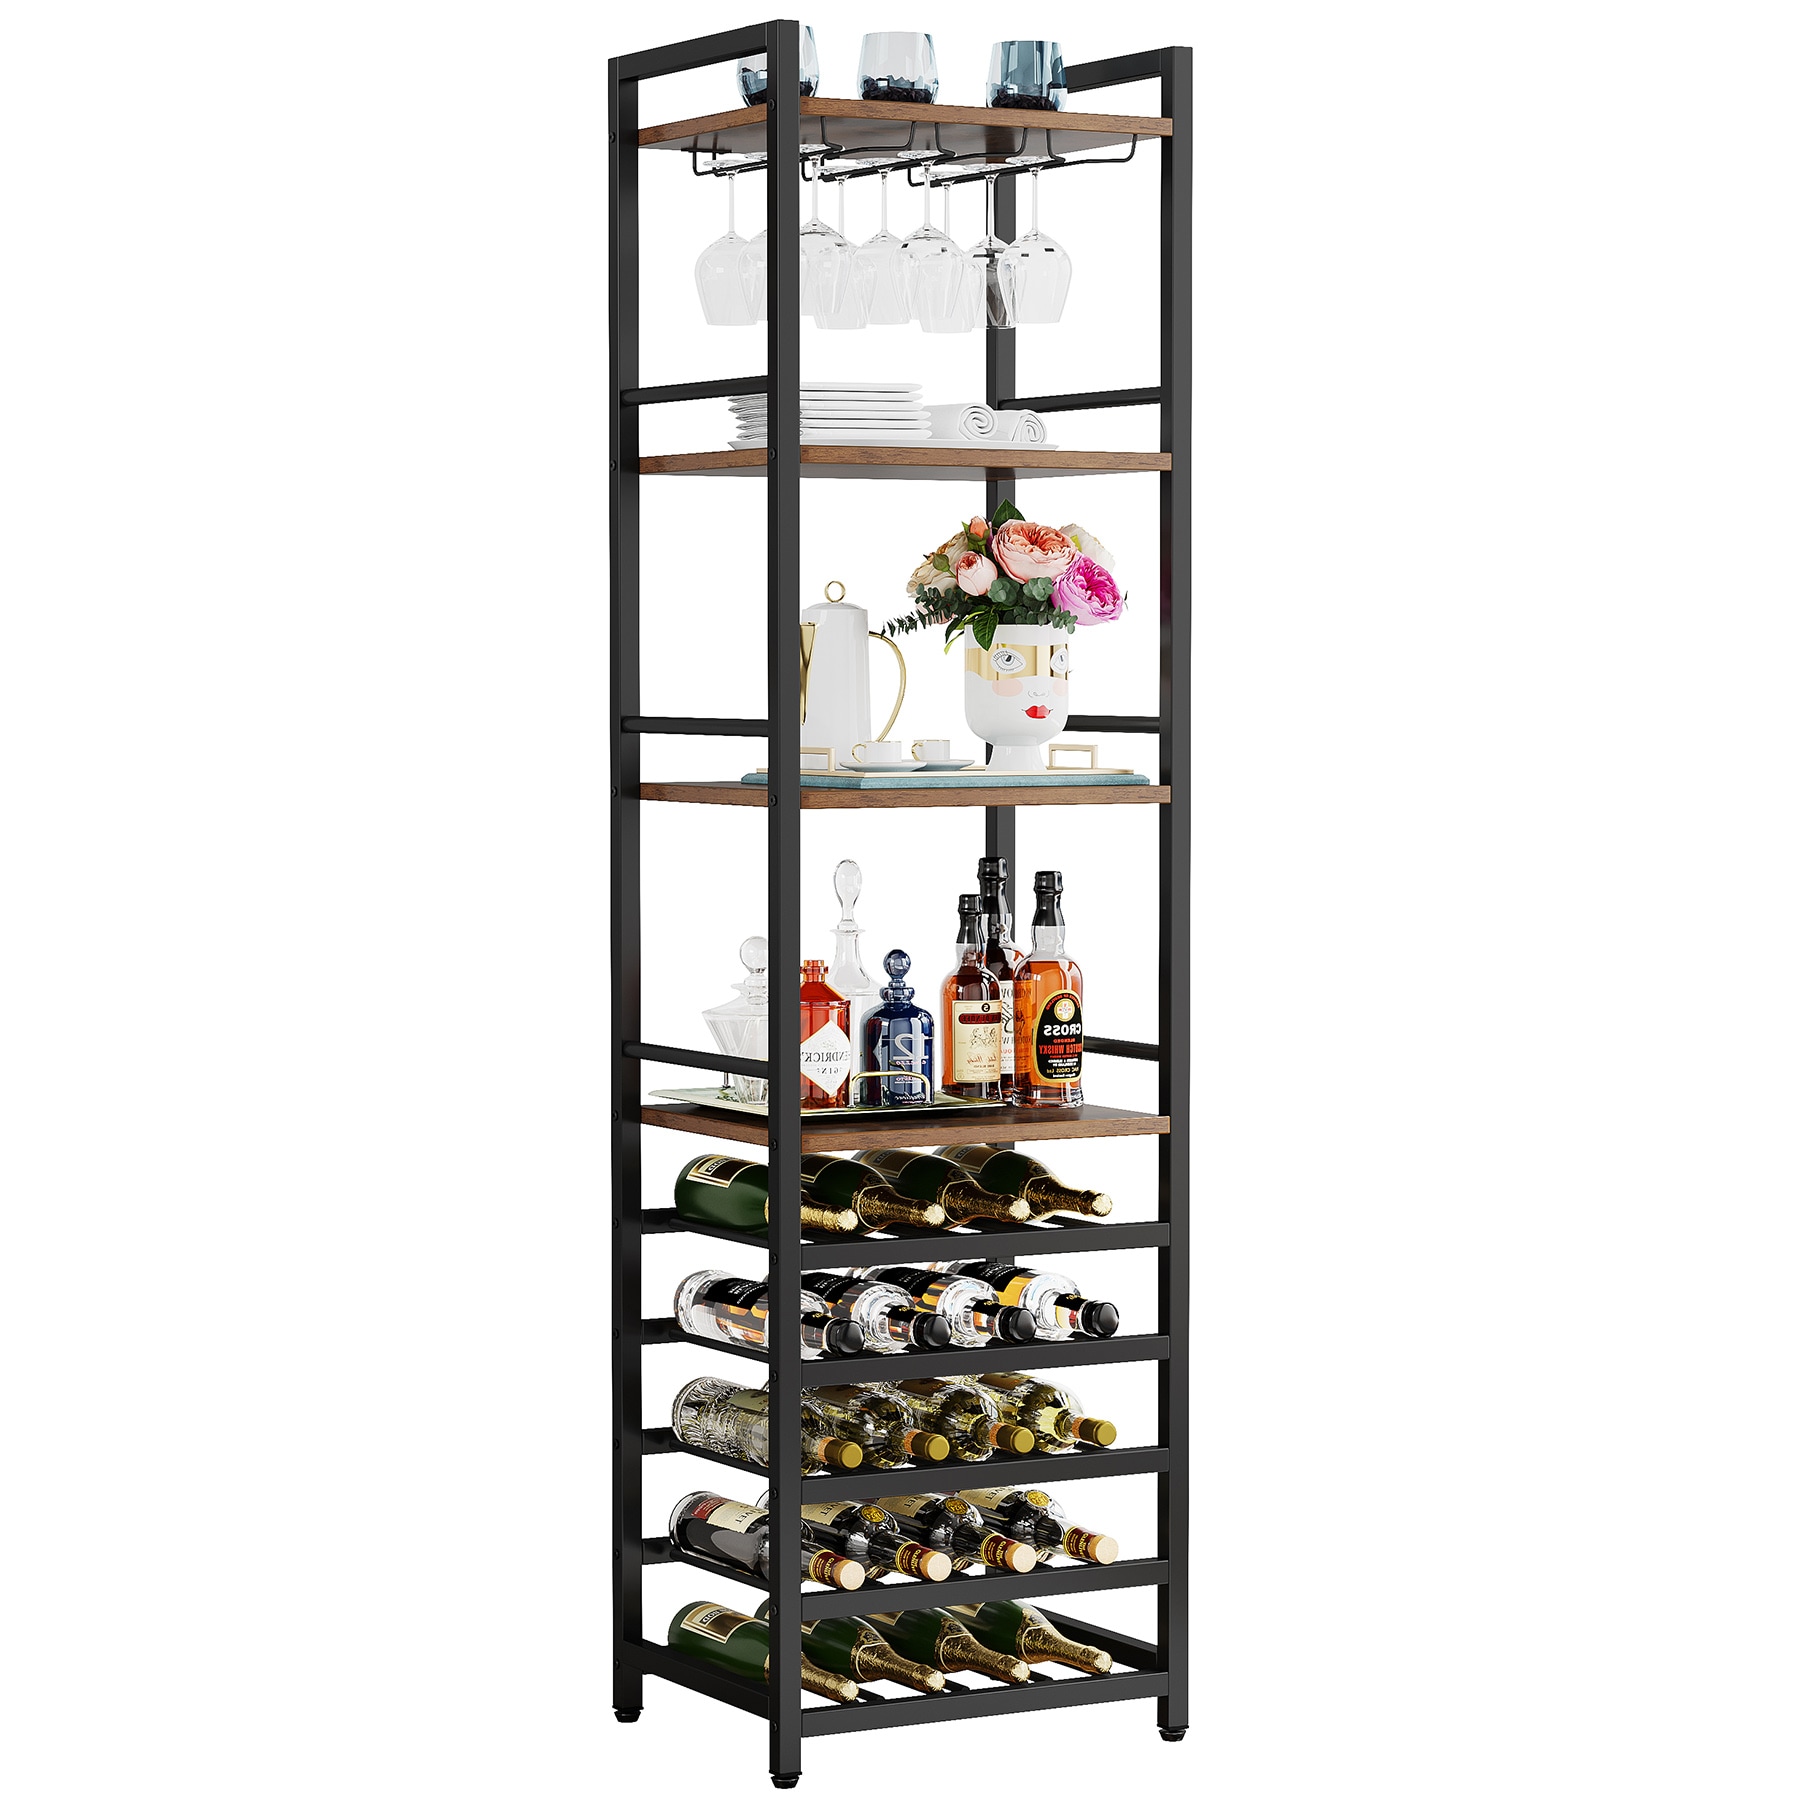 Tribesigns Rustic Brown Wine Rack Table With Glass Holder And Storage Shelves 17 72 In L X 13 78 W 70 87 H Design Freestanding The Department At Lowes Com